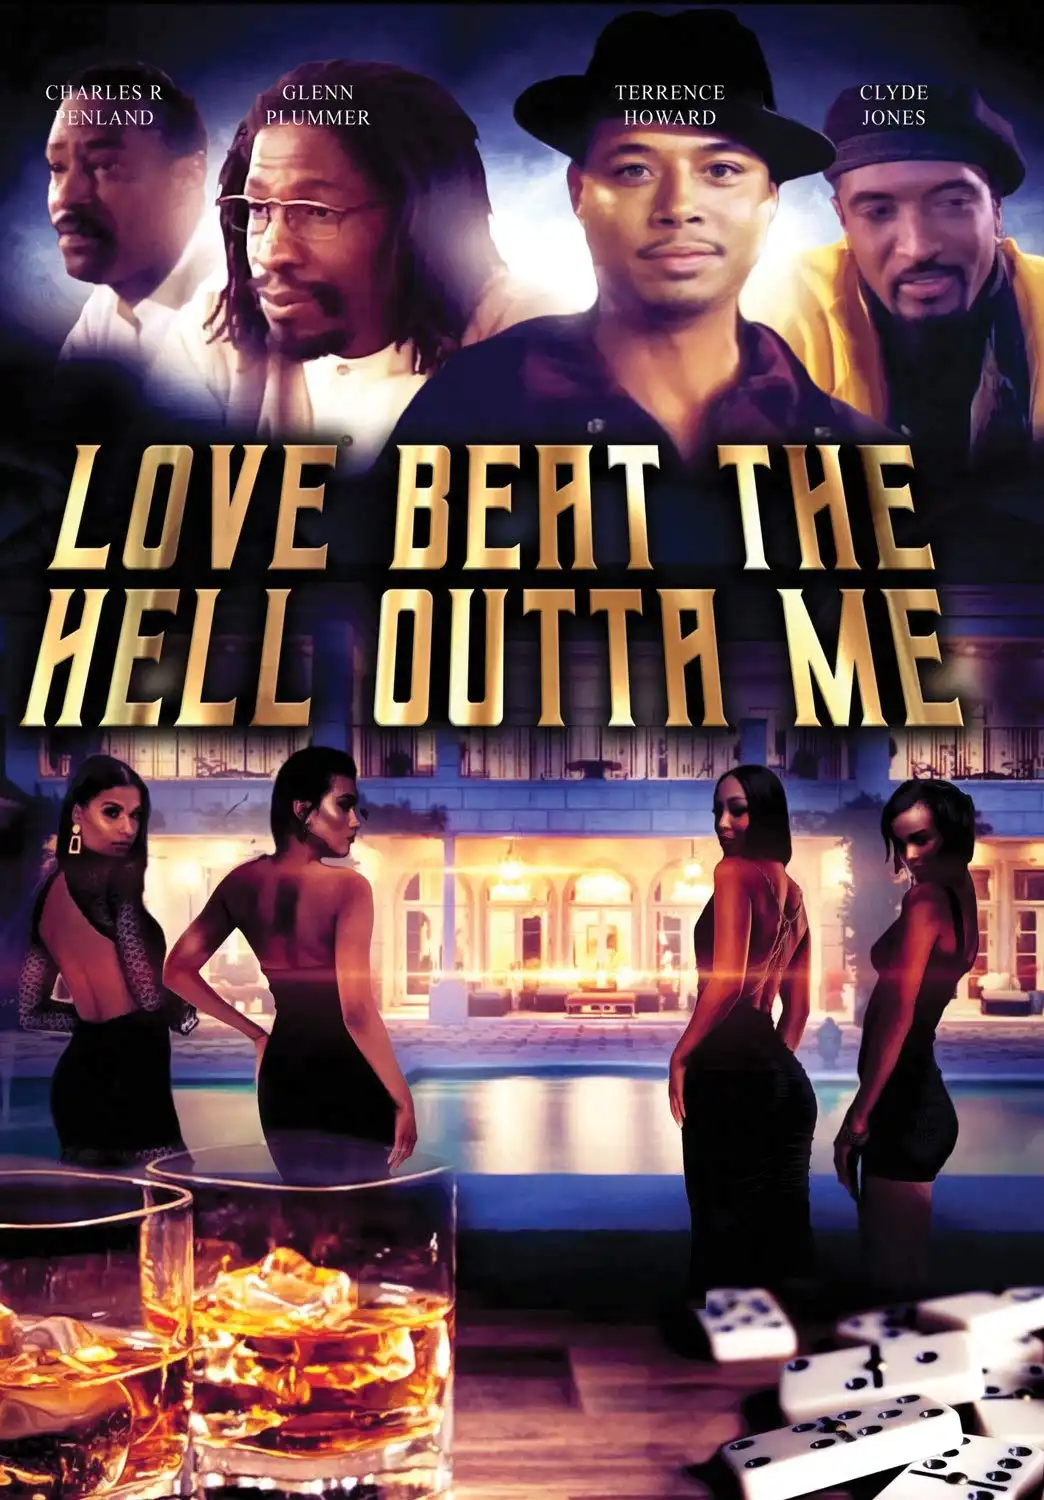 Watch and Download Love Beat the Hell Outta Me 2